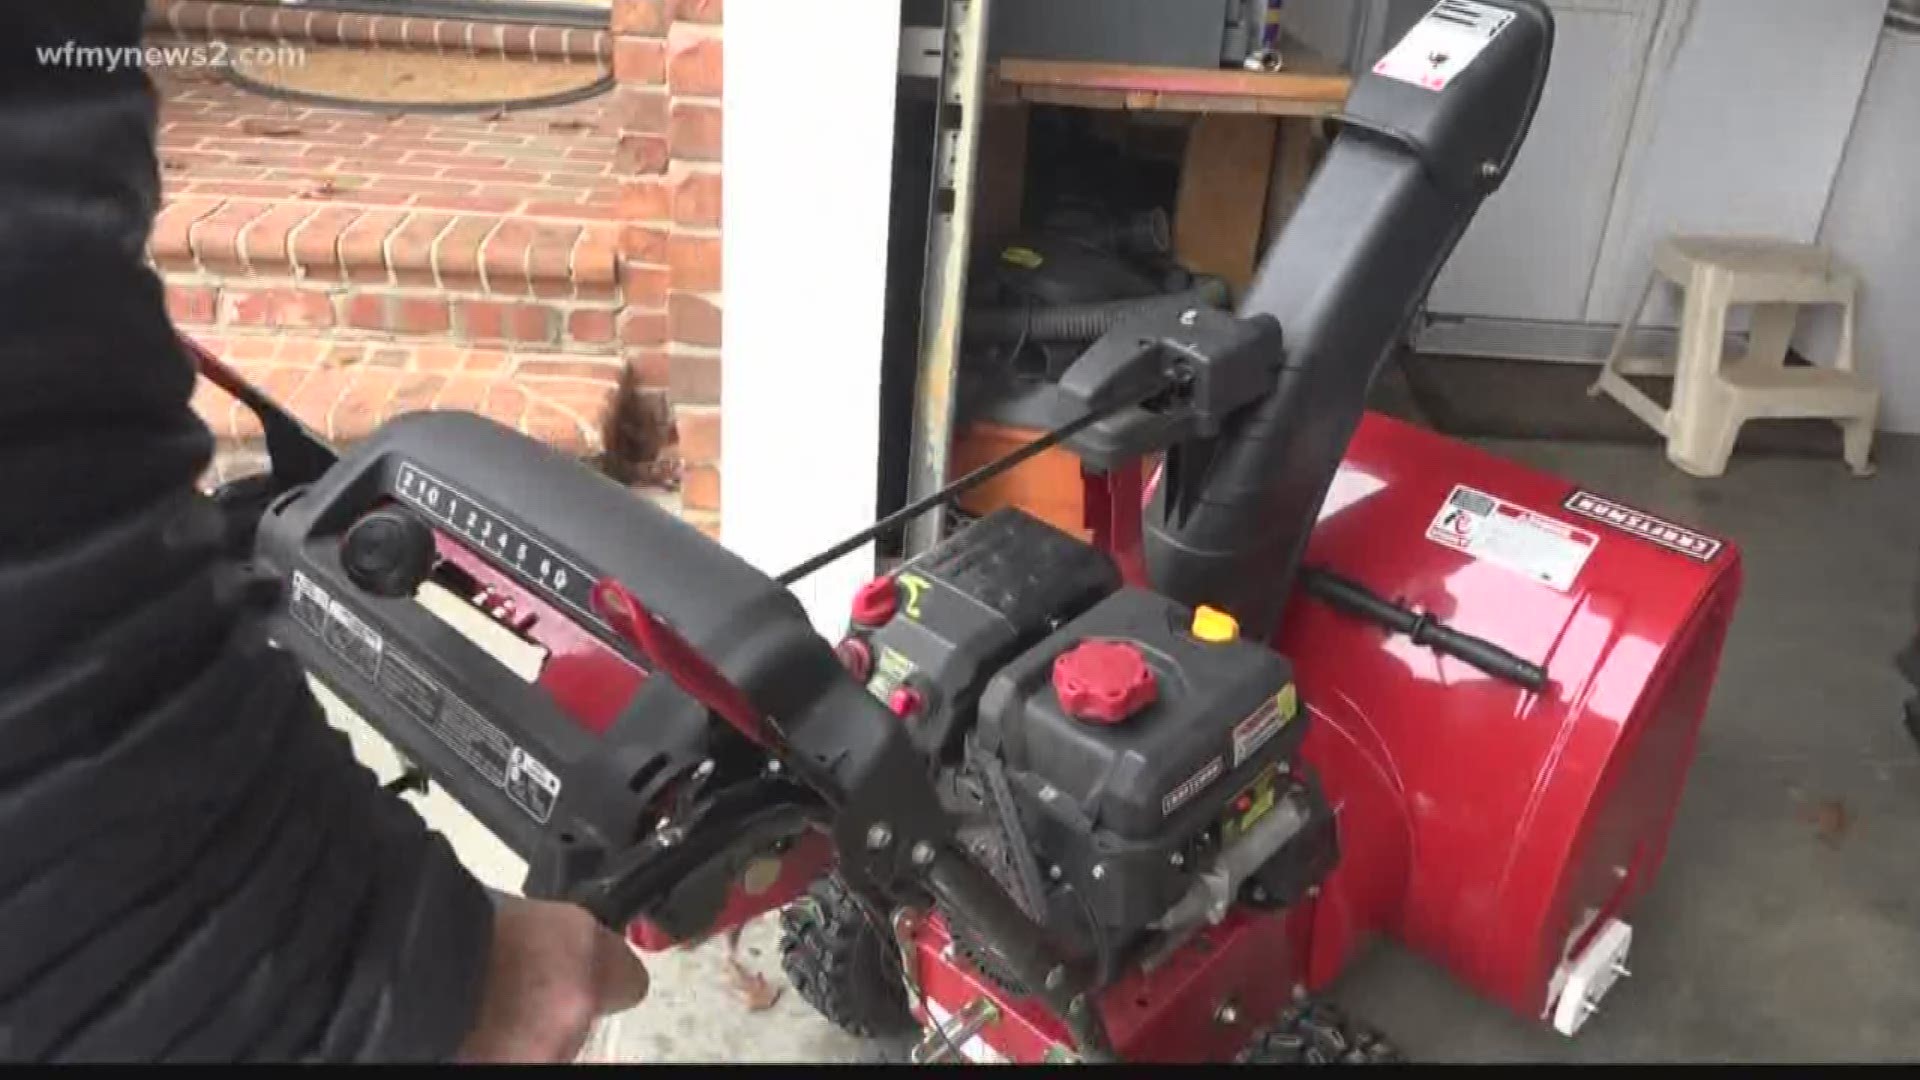 A Greensboro neighborhood solved their snow problems by pitching in to buy a community snow blower.